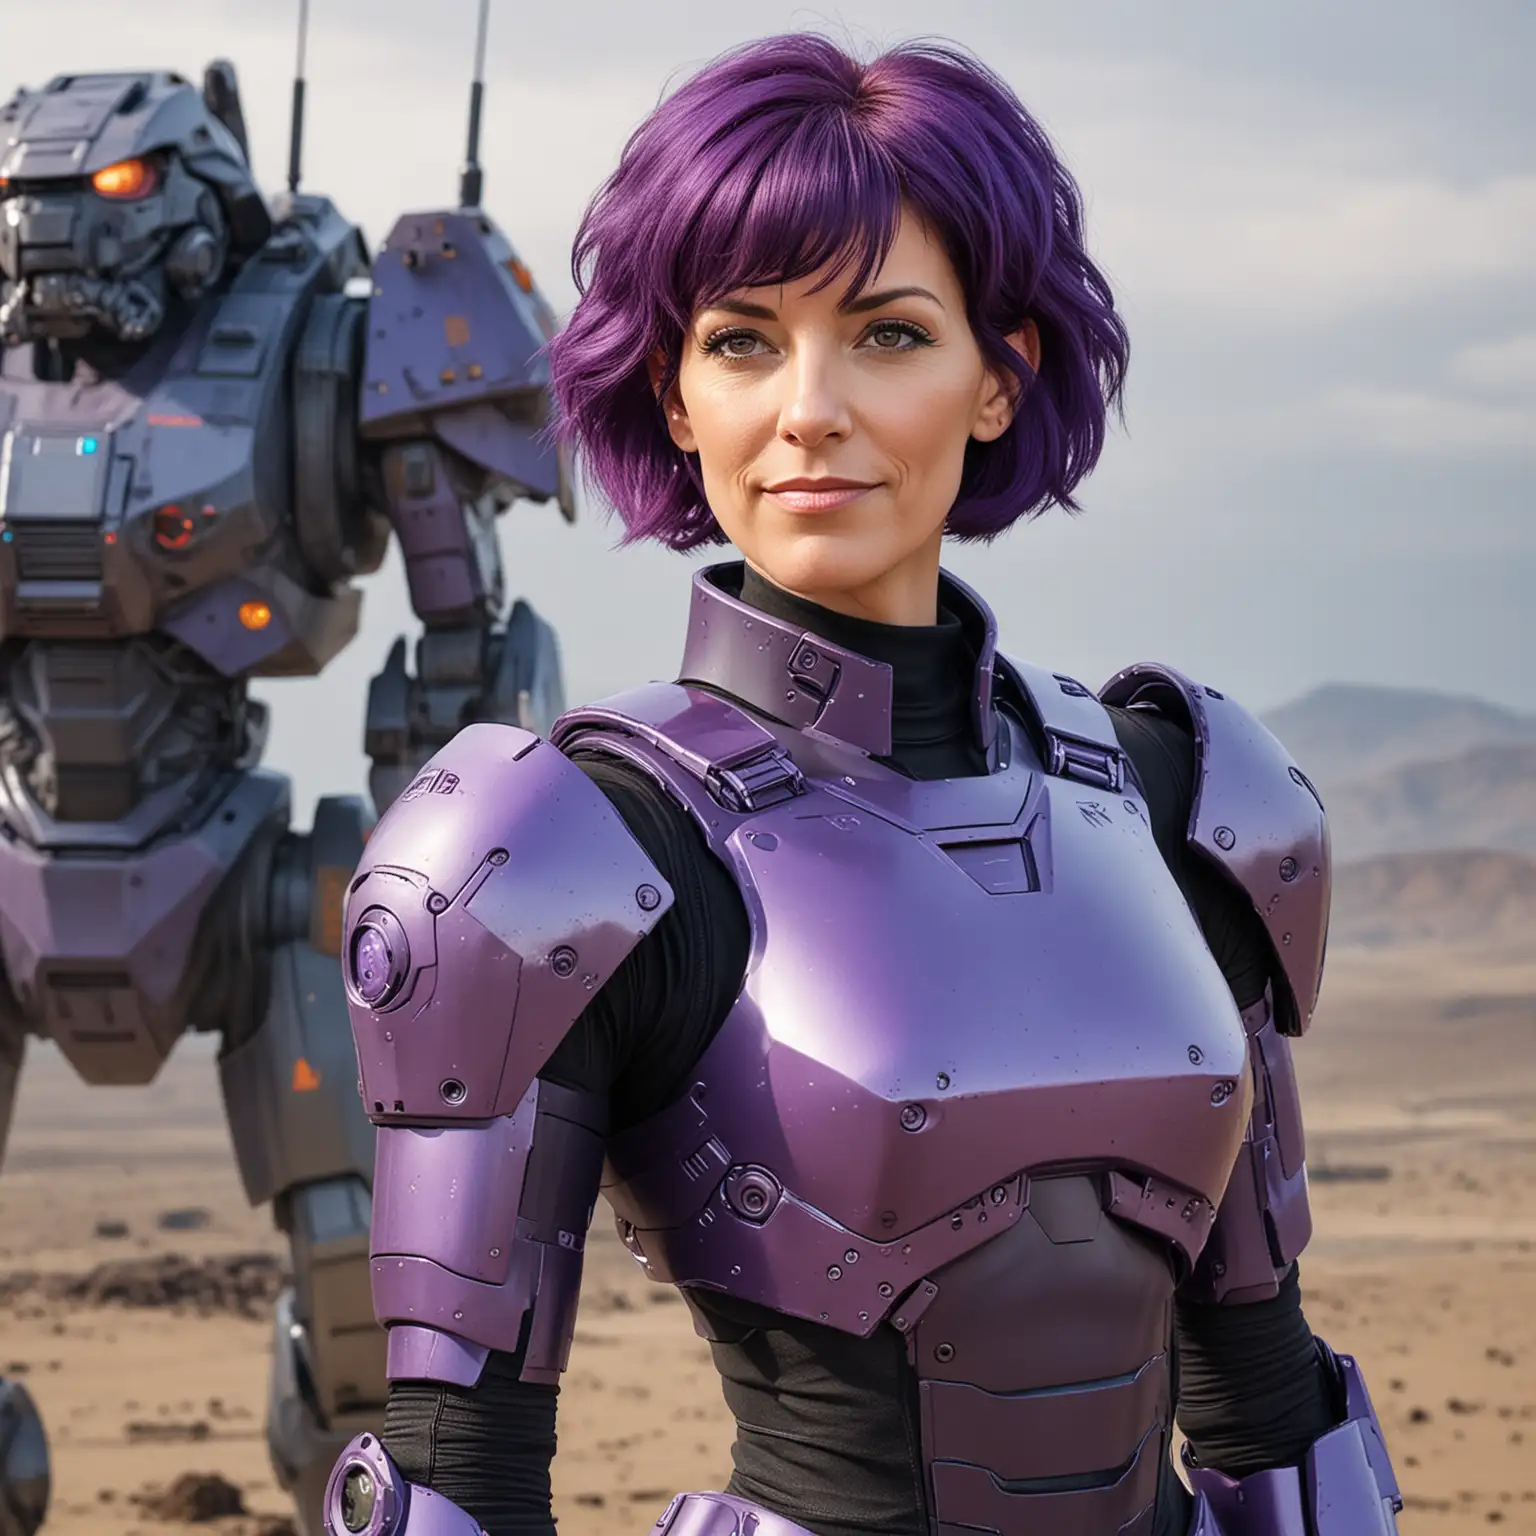 pretty,karen oberst facebook, short purple hair, 49 years old, 166 pounds, five foot one inch tall, wearing  power armour a 90's cartoon character ,full body image battletech inspired, fighting giant space crabs

